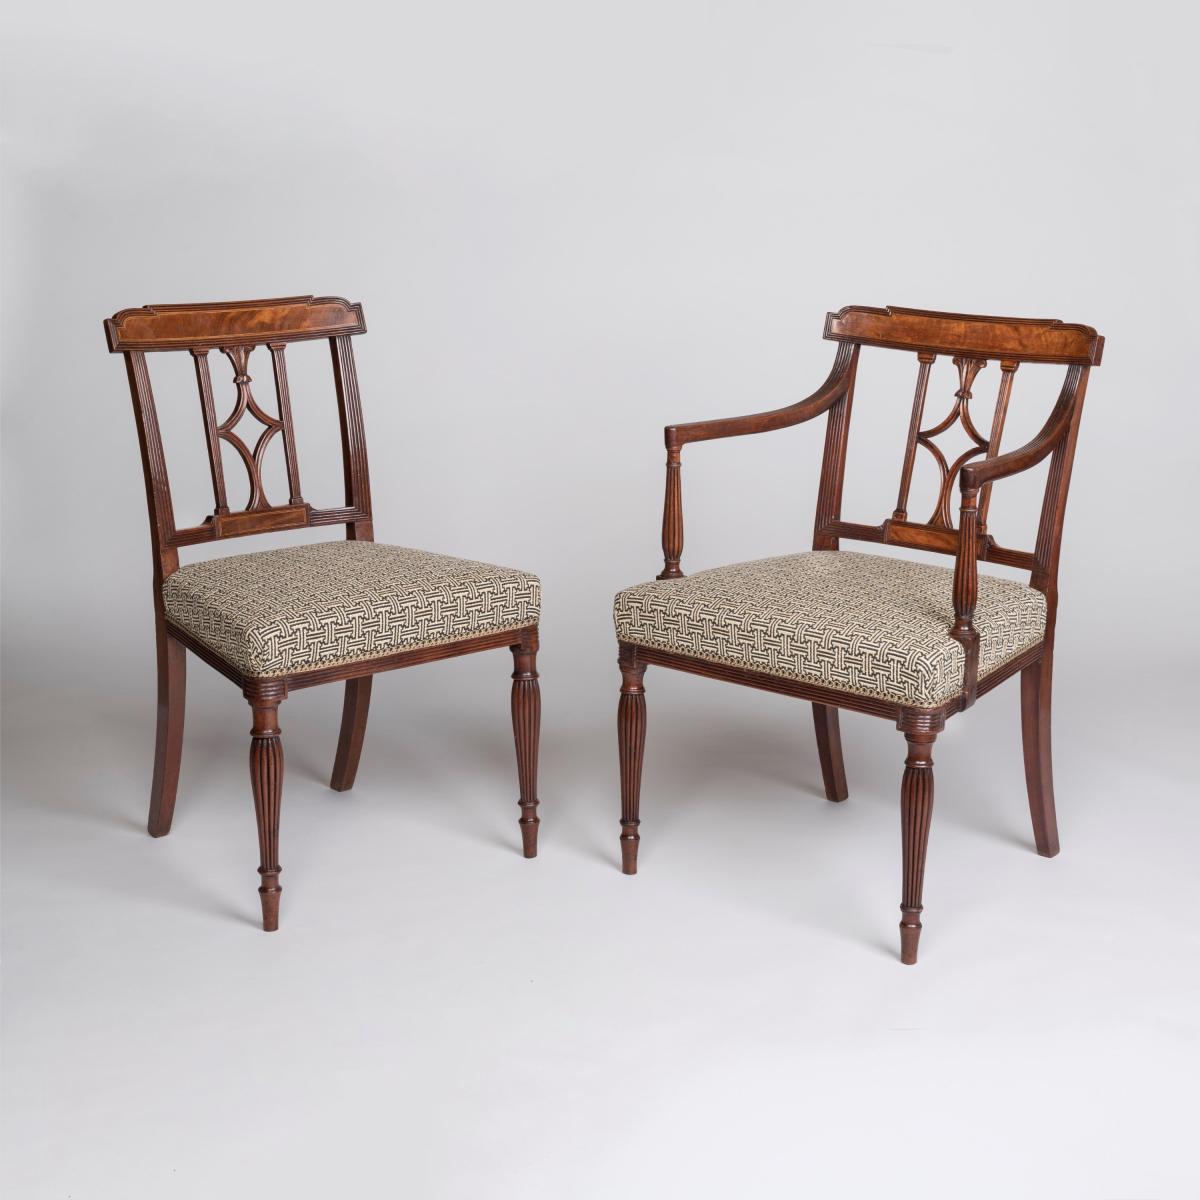 A Fine Set of Twelve George III Period Mahogany Dining Chairs